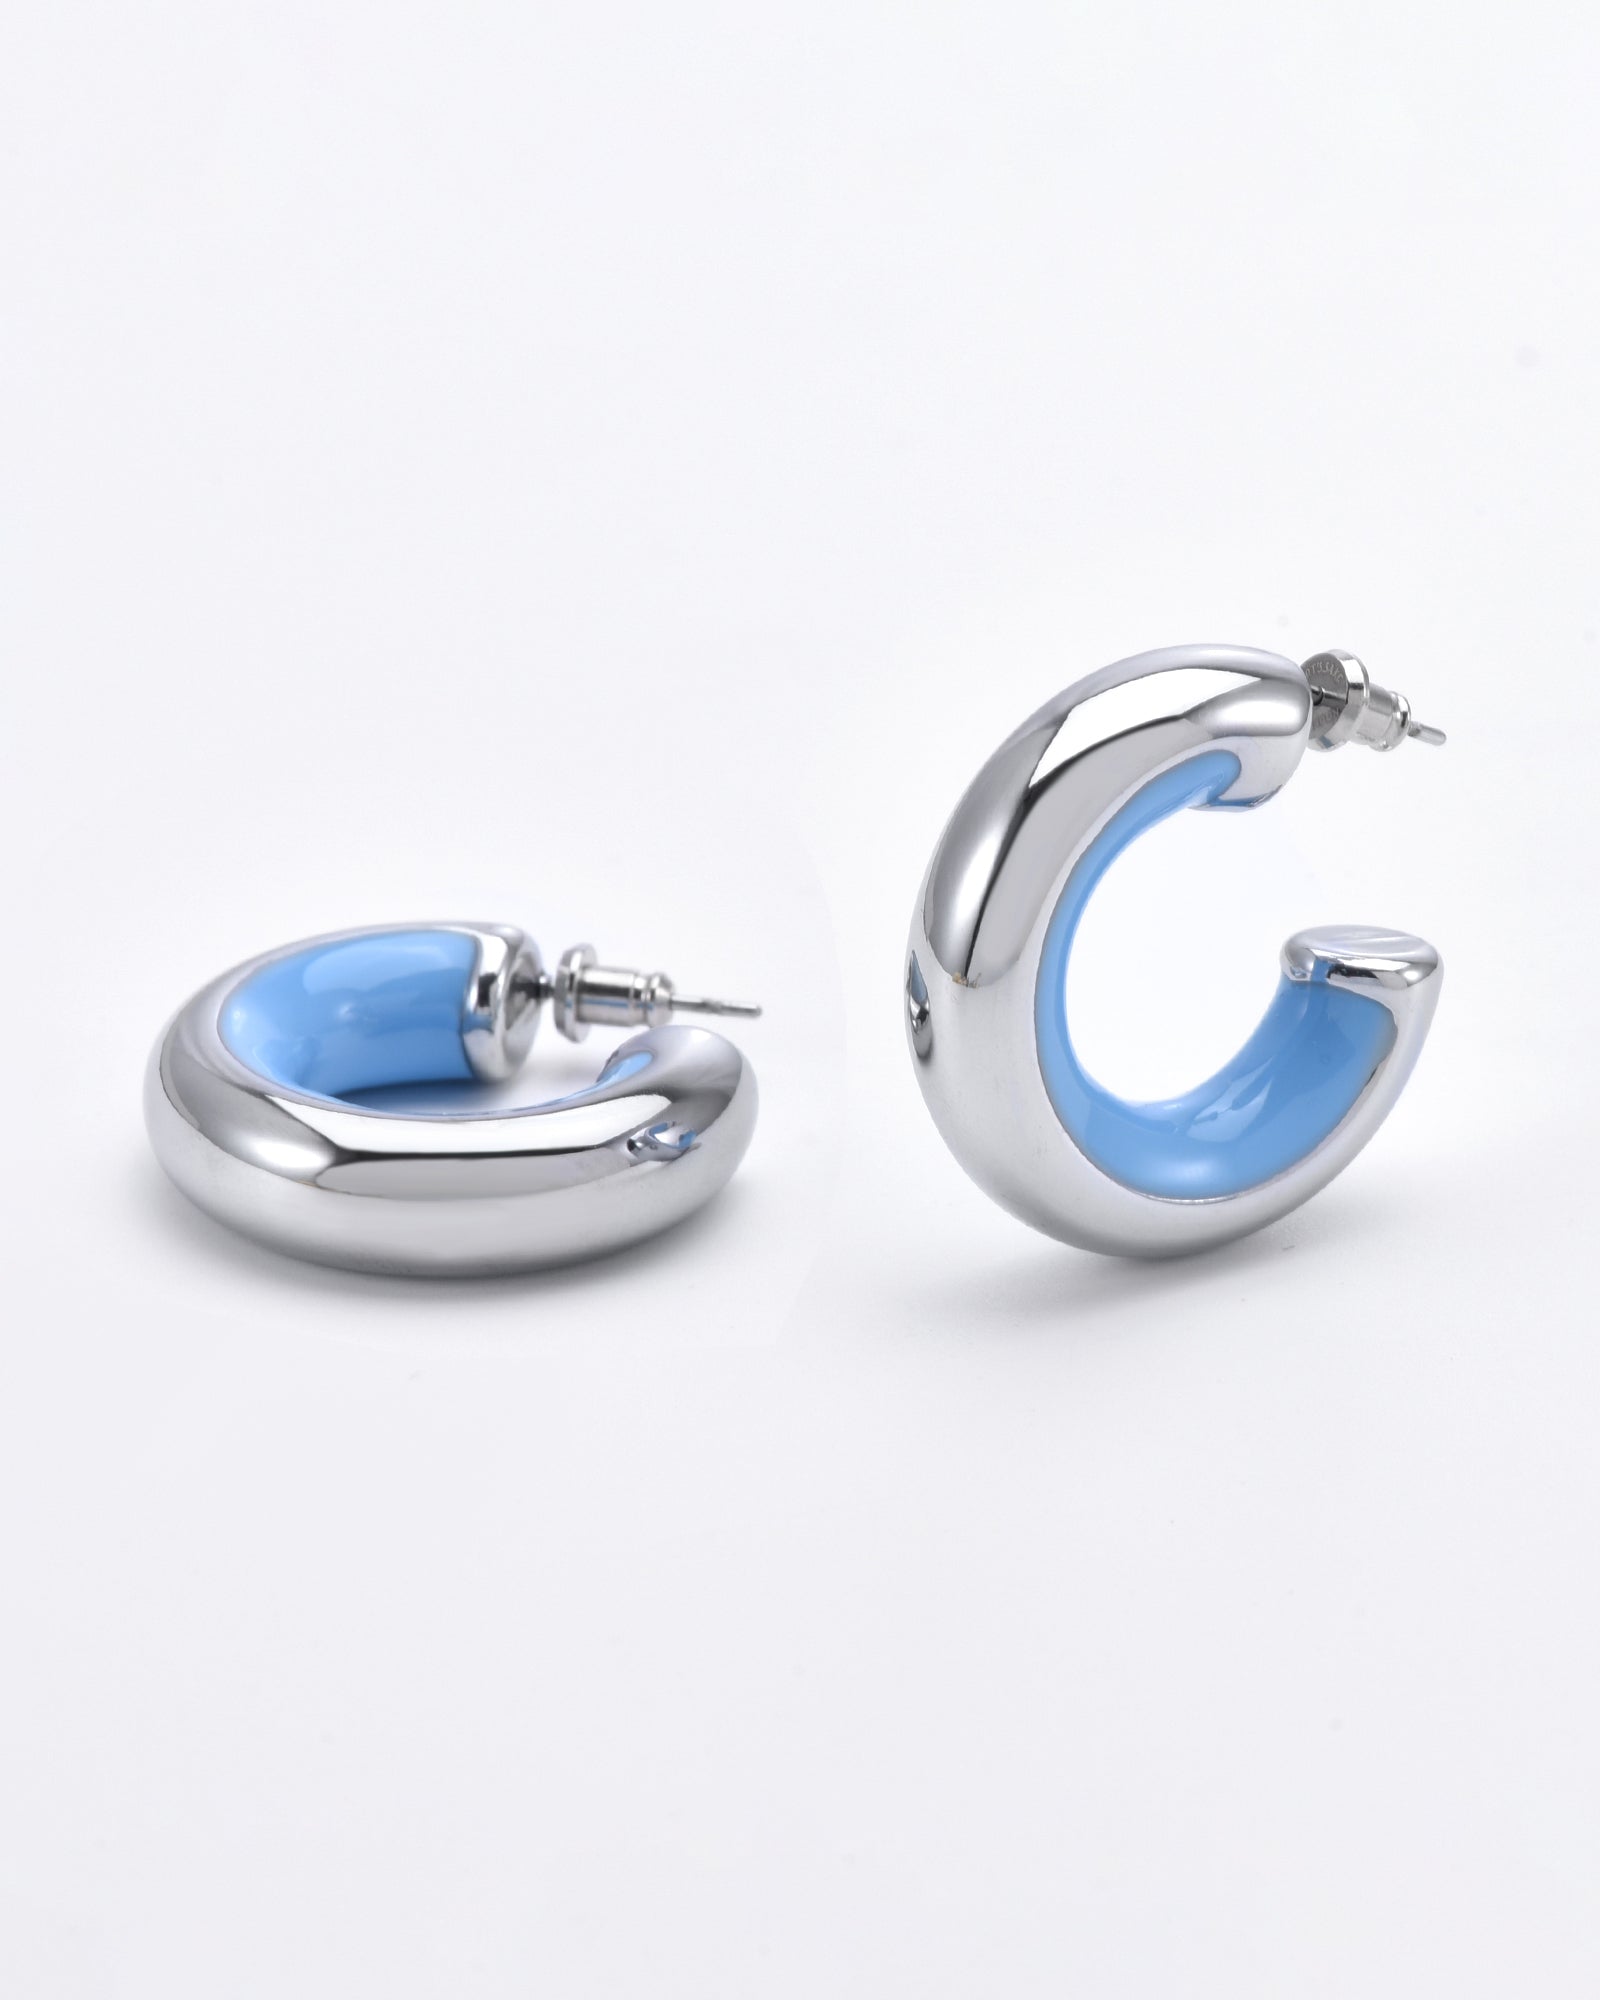 A pair of silver hoop Lotus Earrings Blue by For Art's Sake® with an inner lining of light blue are pictured against a plain white background. The 24-karat gold plated earrings are semi-circular and one is laid flat while the other is standing upright.